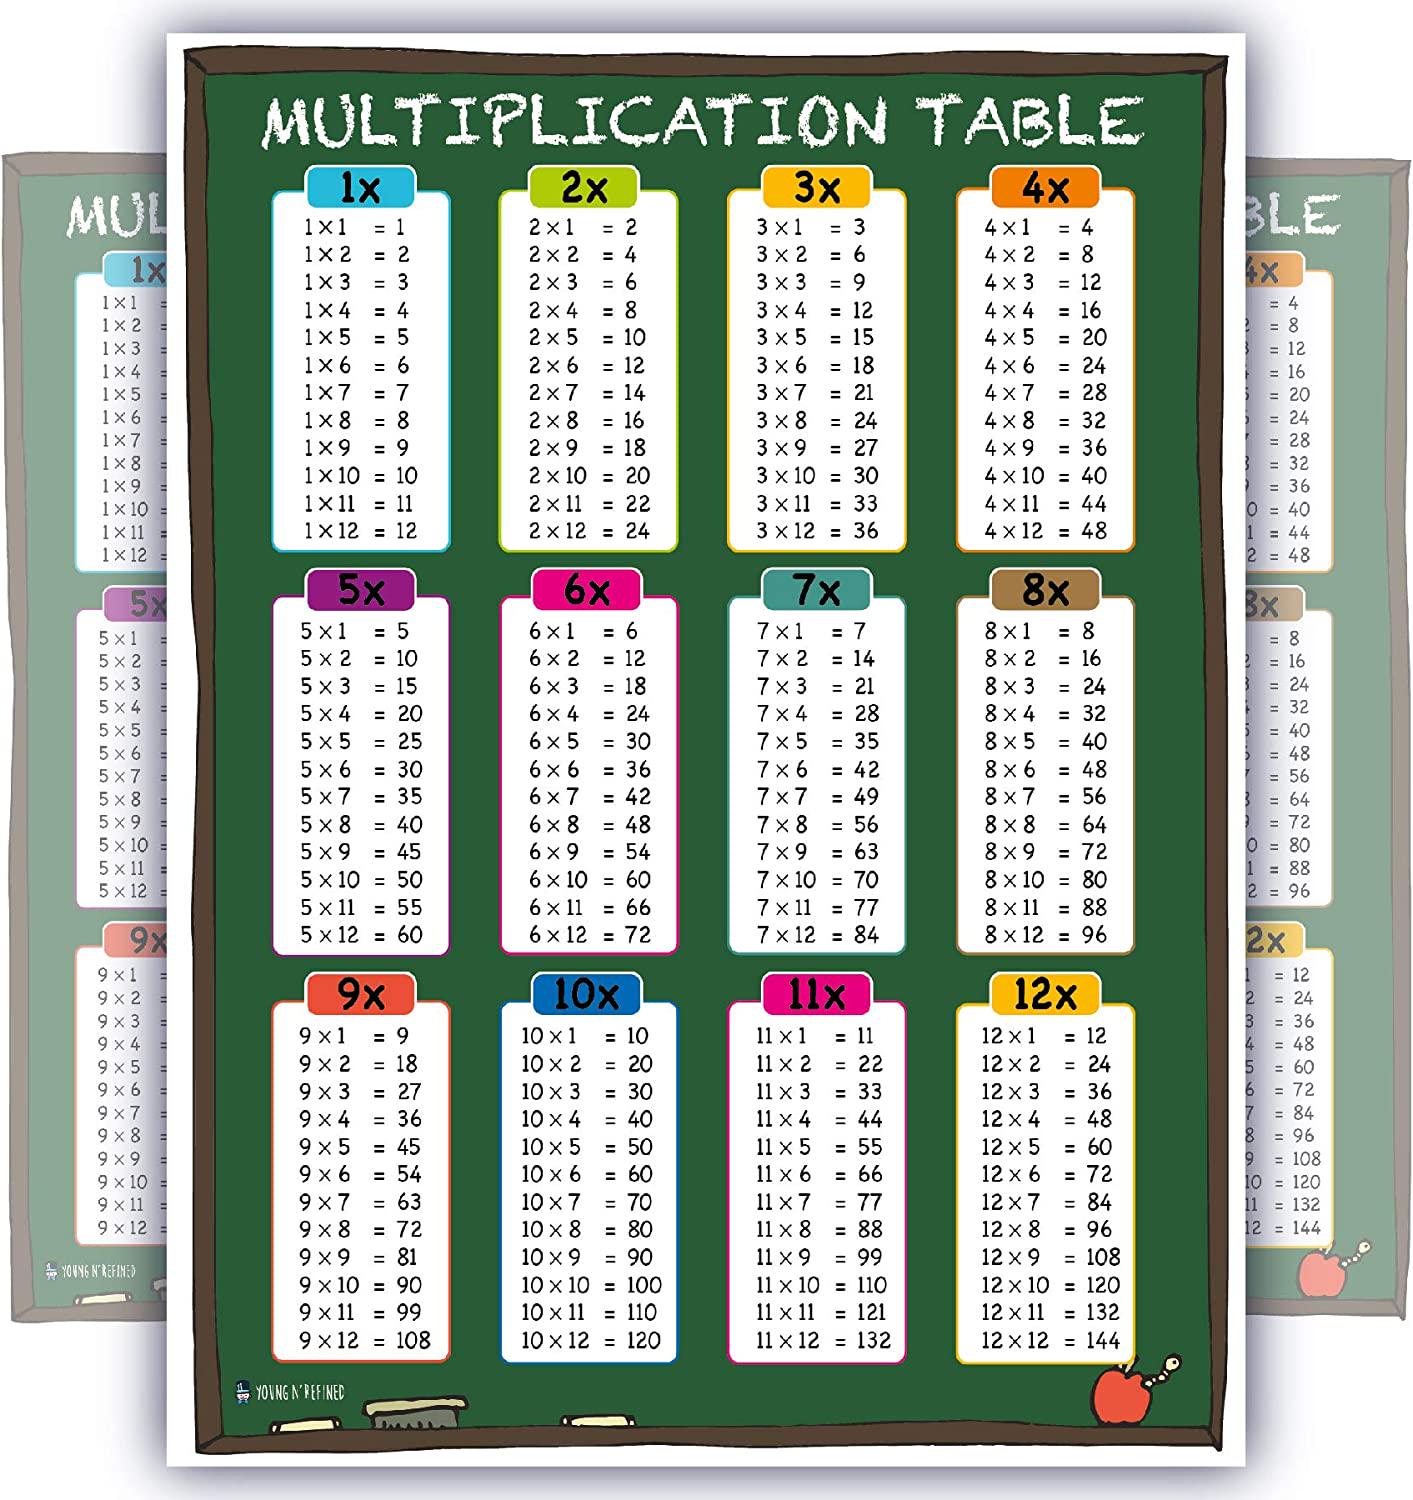 Young N Refined, Learning Multiplication table tabs Chalk chart fully LAMINATED poster for classroom clear teaching math tool for school UPDATED to 12x12 (15x20)